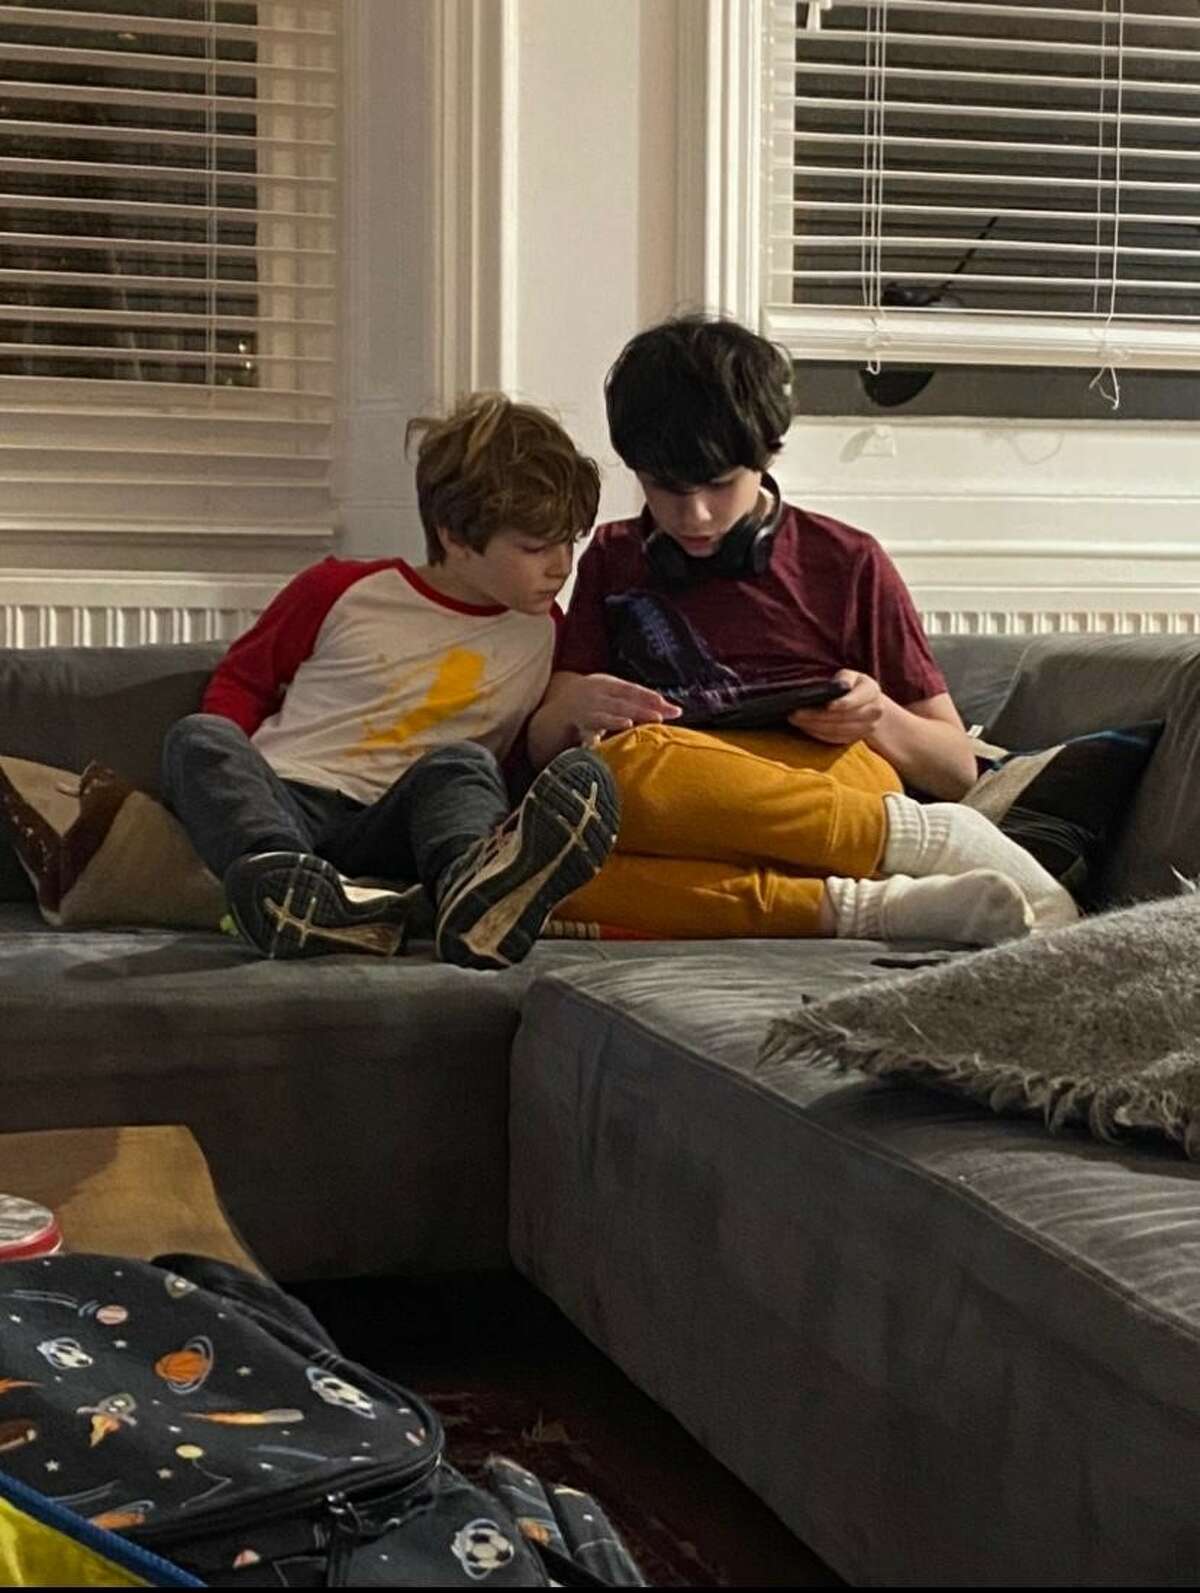 Claire Tisne Haft's sons, Louie and George, addicted to their devices.